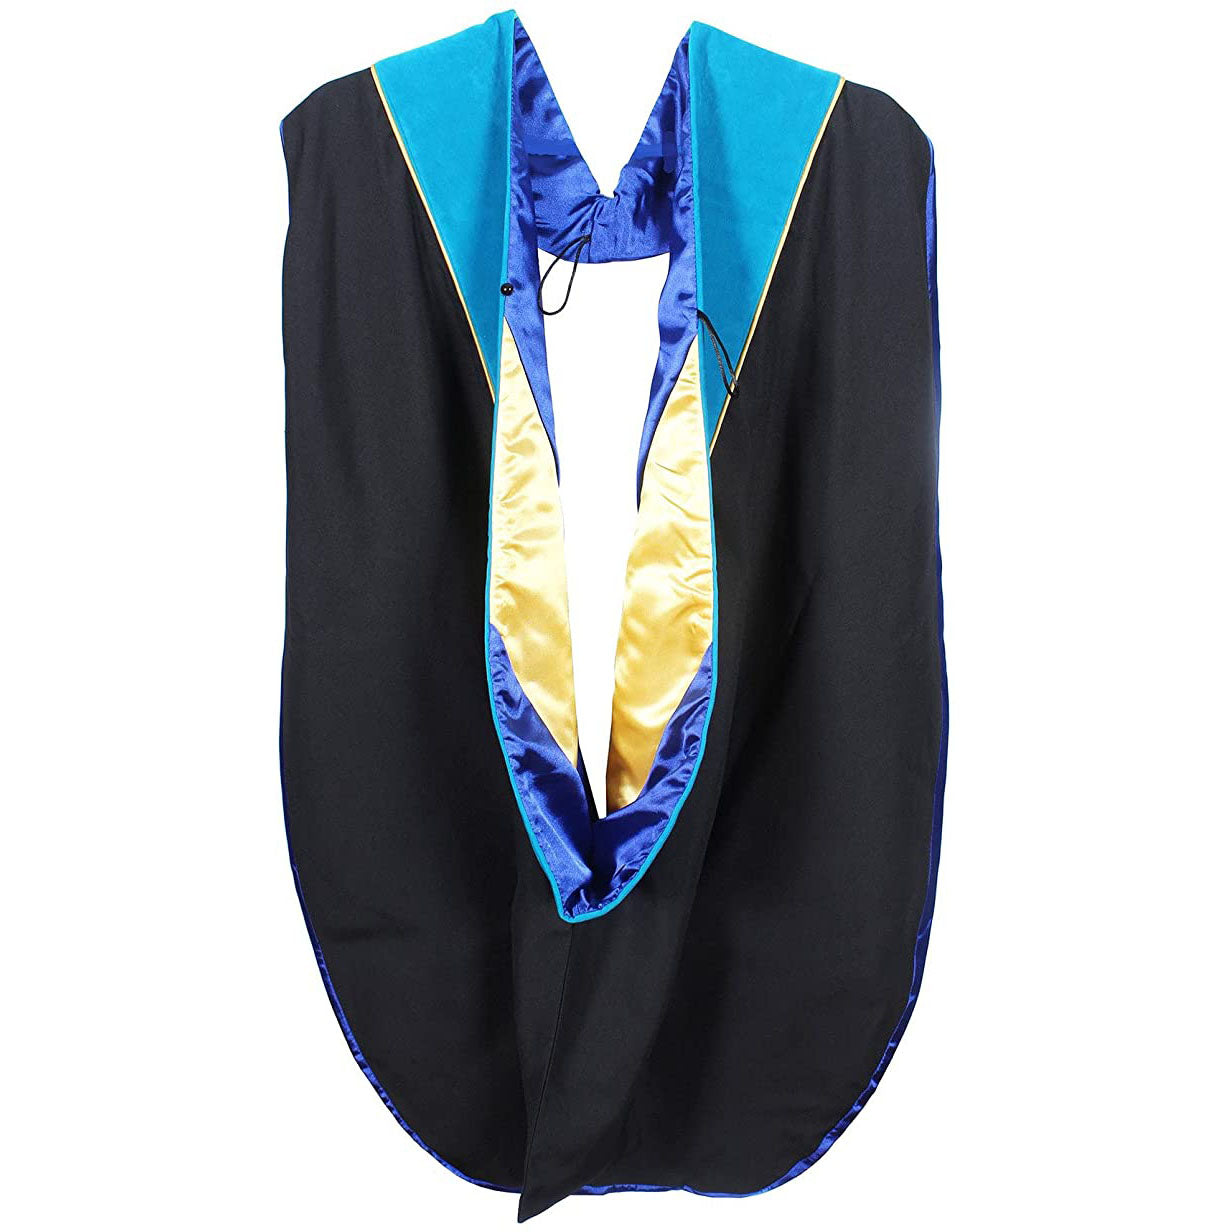 Doctorate Hood - Peacock Blue Velvet - Royal Blue Lining - Gold Chevron - Gold Piping